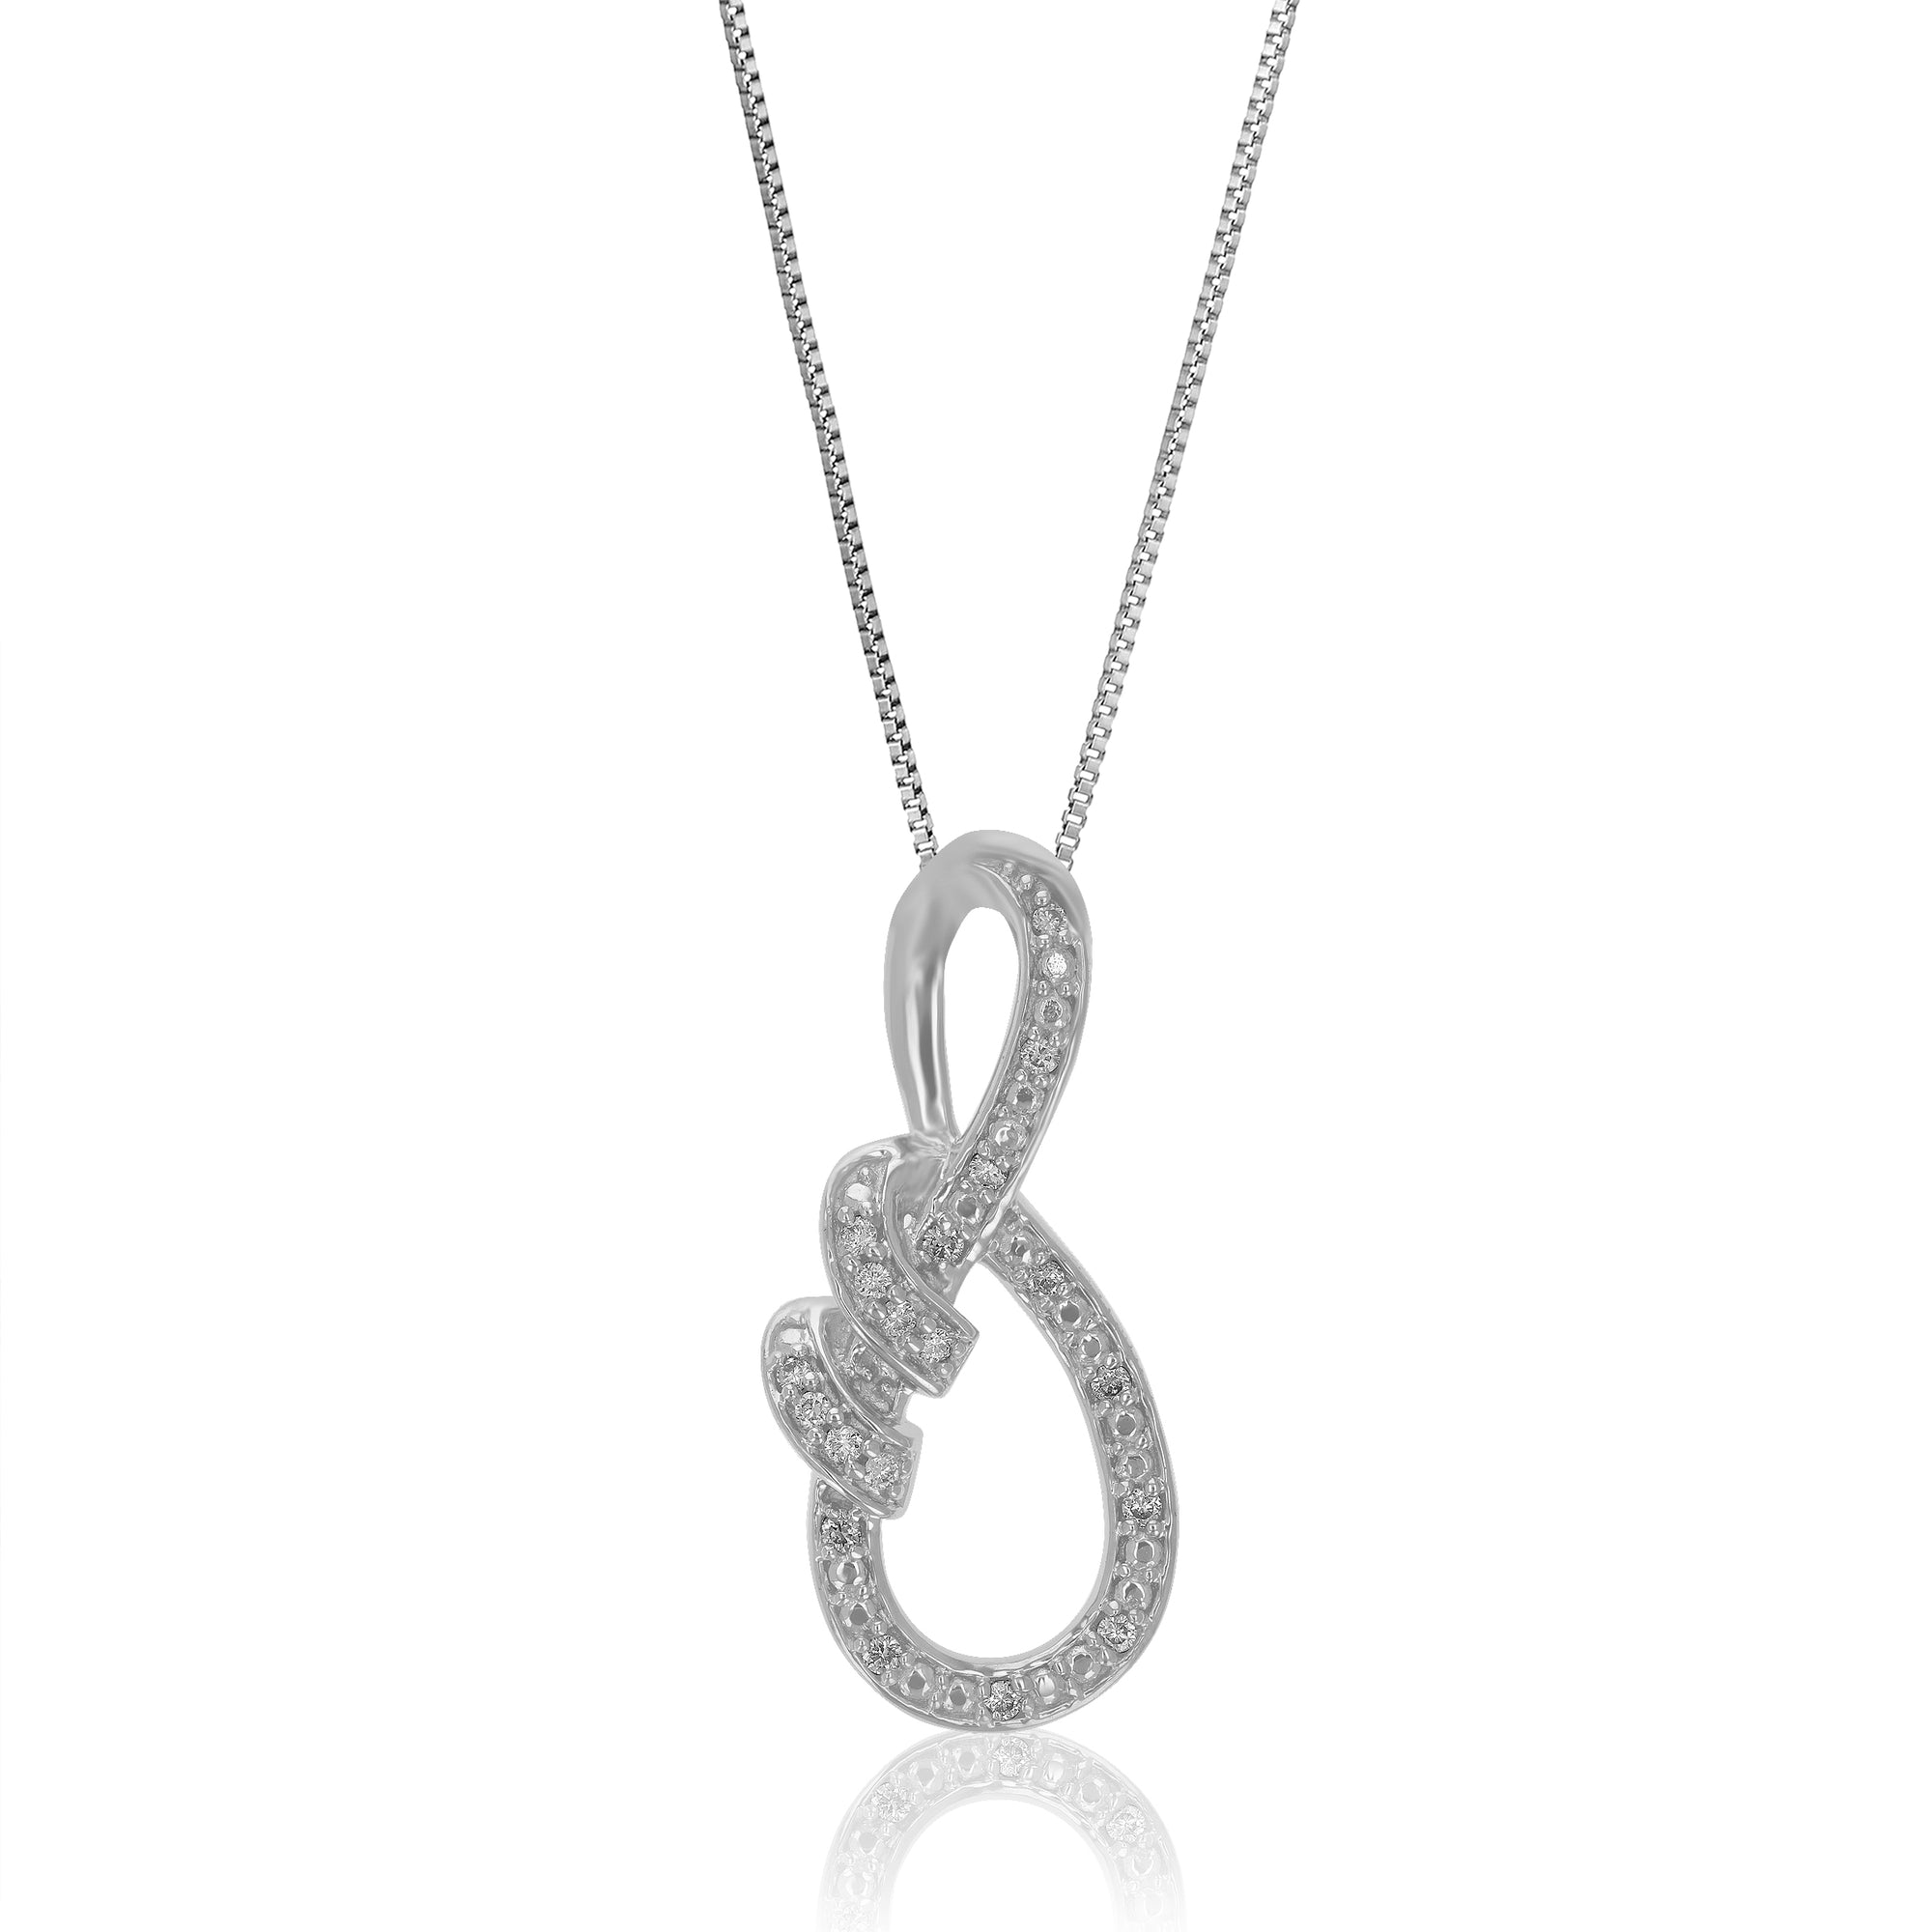 1/10 cttw Diamond Pendant Necklace for Women, Lab Grown Diamond Infinity Pendant Necklace in .925 Sterling Silver with Chain, Size 1 Inch